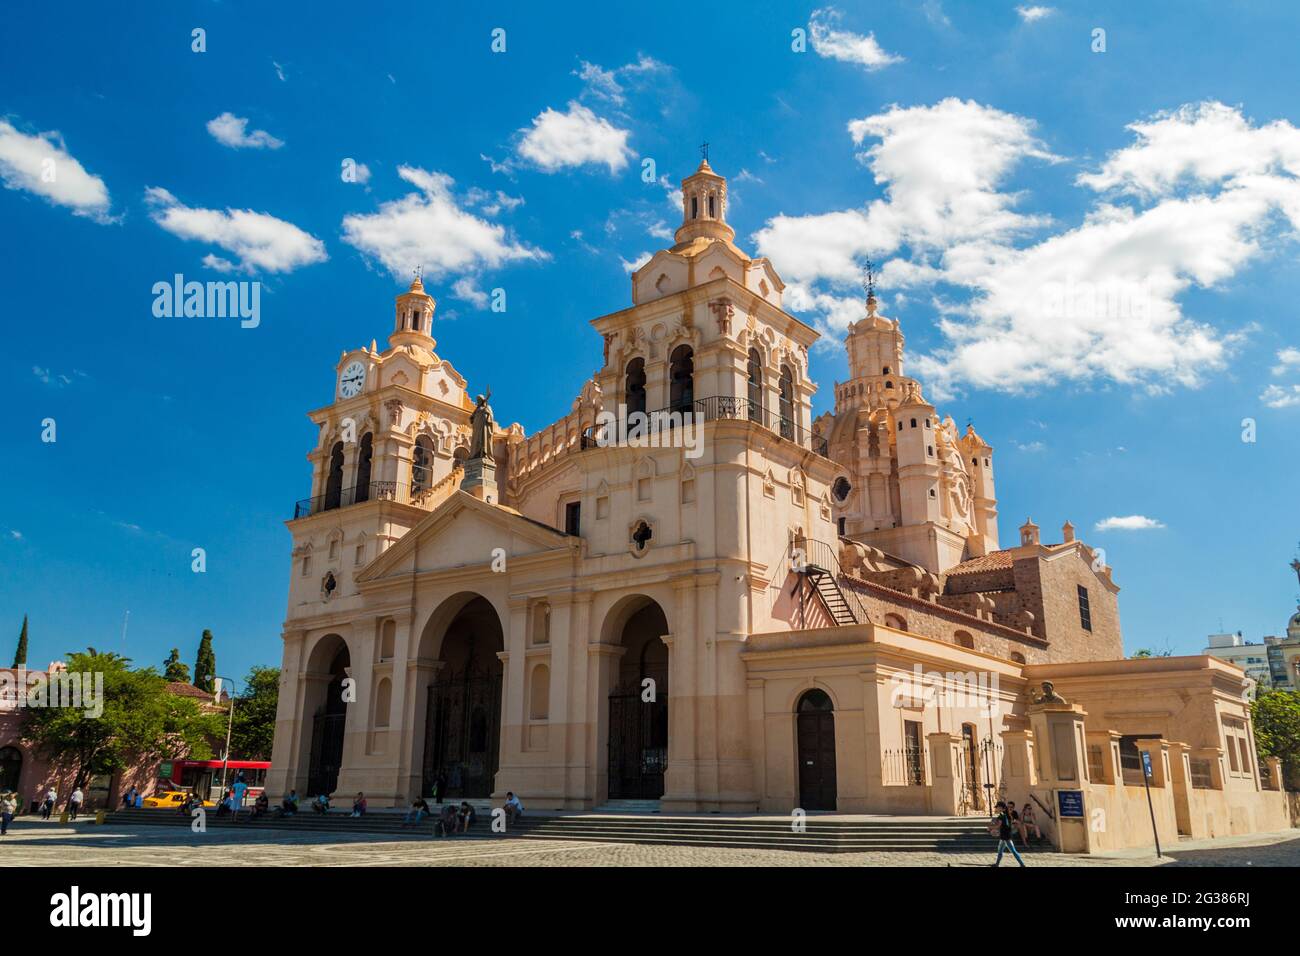 CORDOBA, ARGENTINA - APRIL 2, 2015: View of Cathedral of Cordoba (Our Lady of the Assumption). Stock Photo